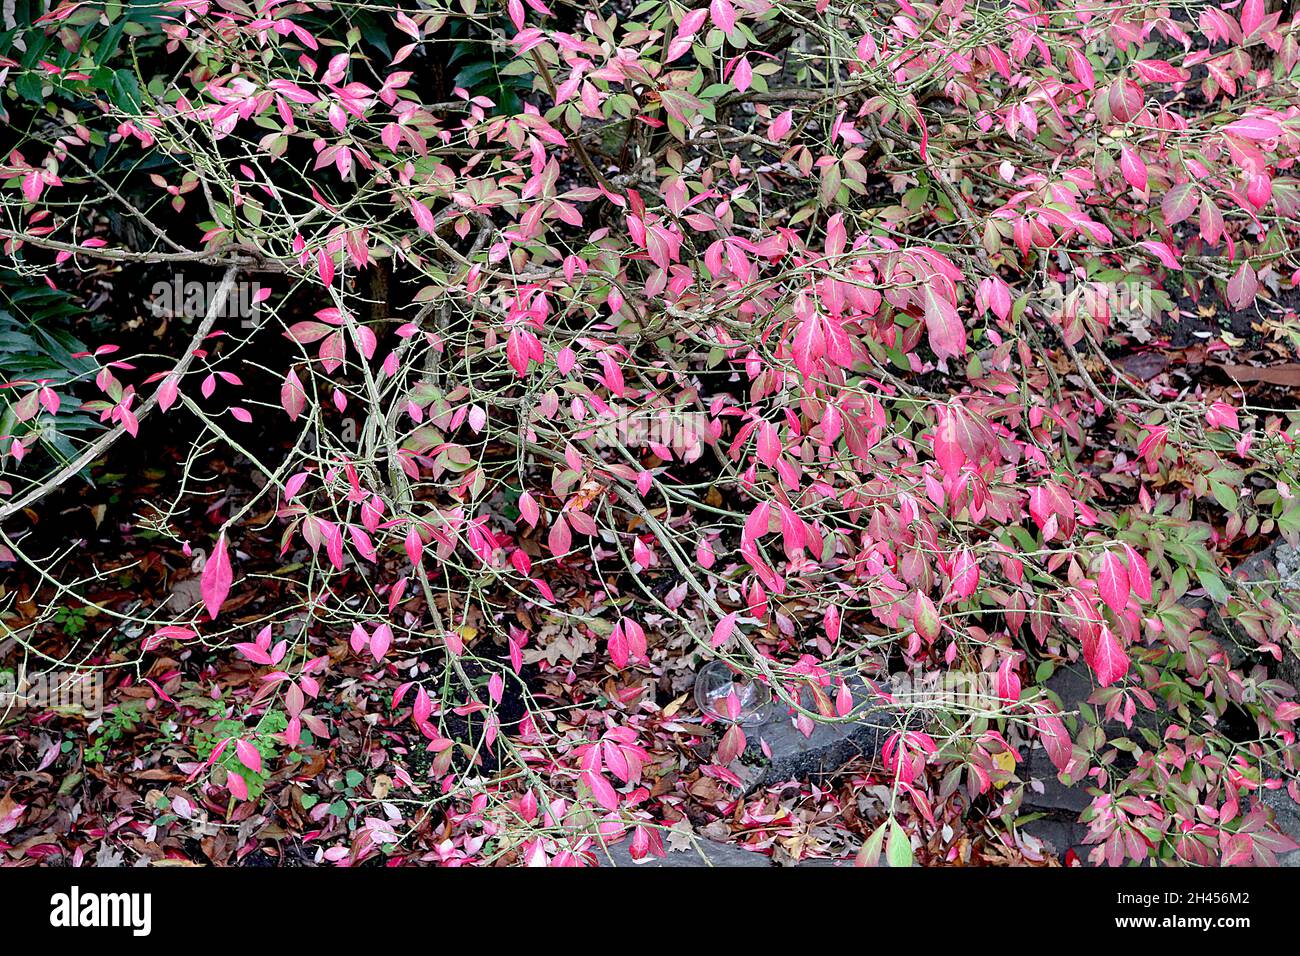 Euonymus alatus winged spindle – bright pink pointed ovate leaves,  October, England, UK Stock Photo